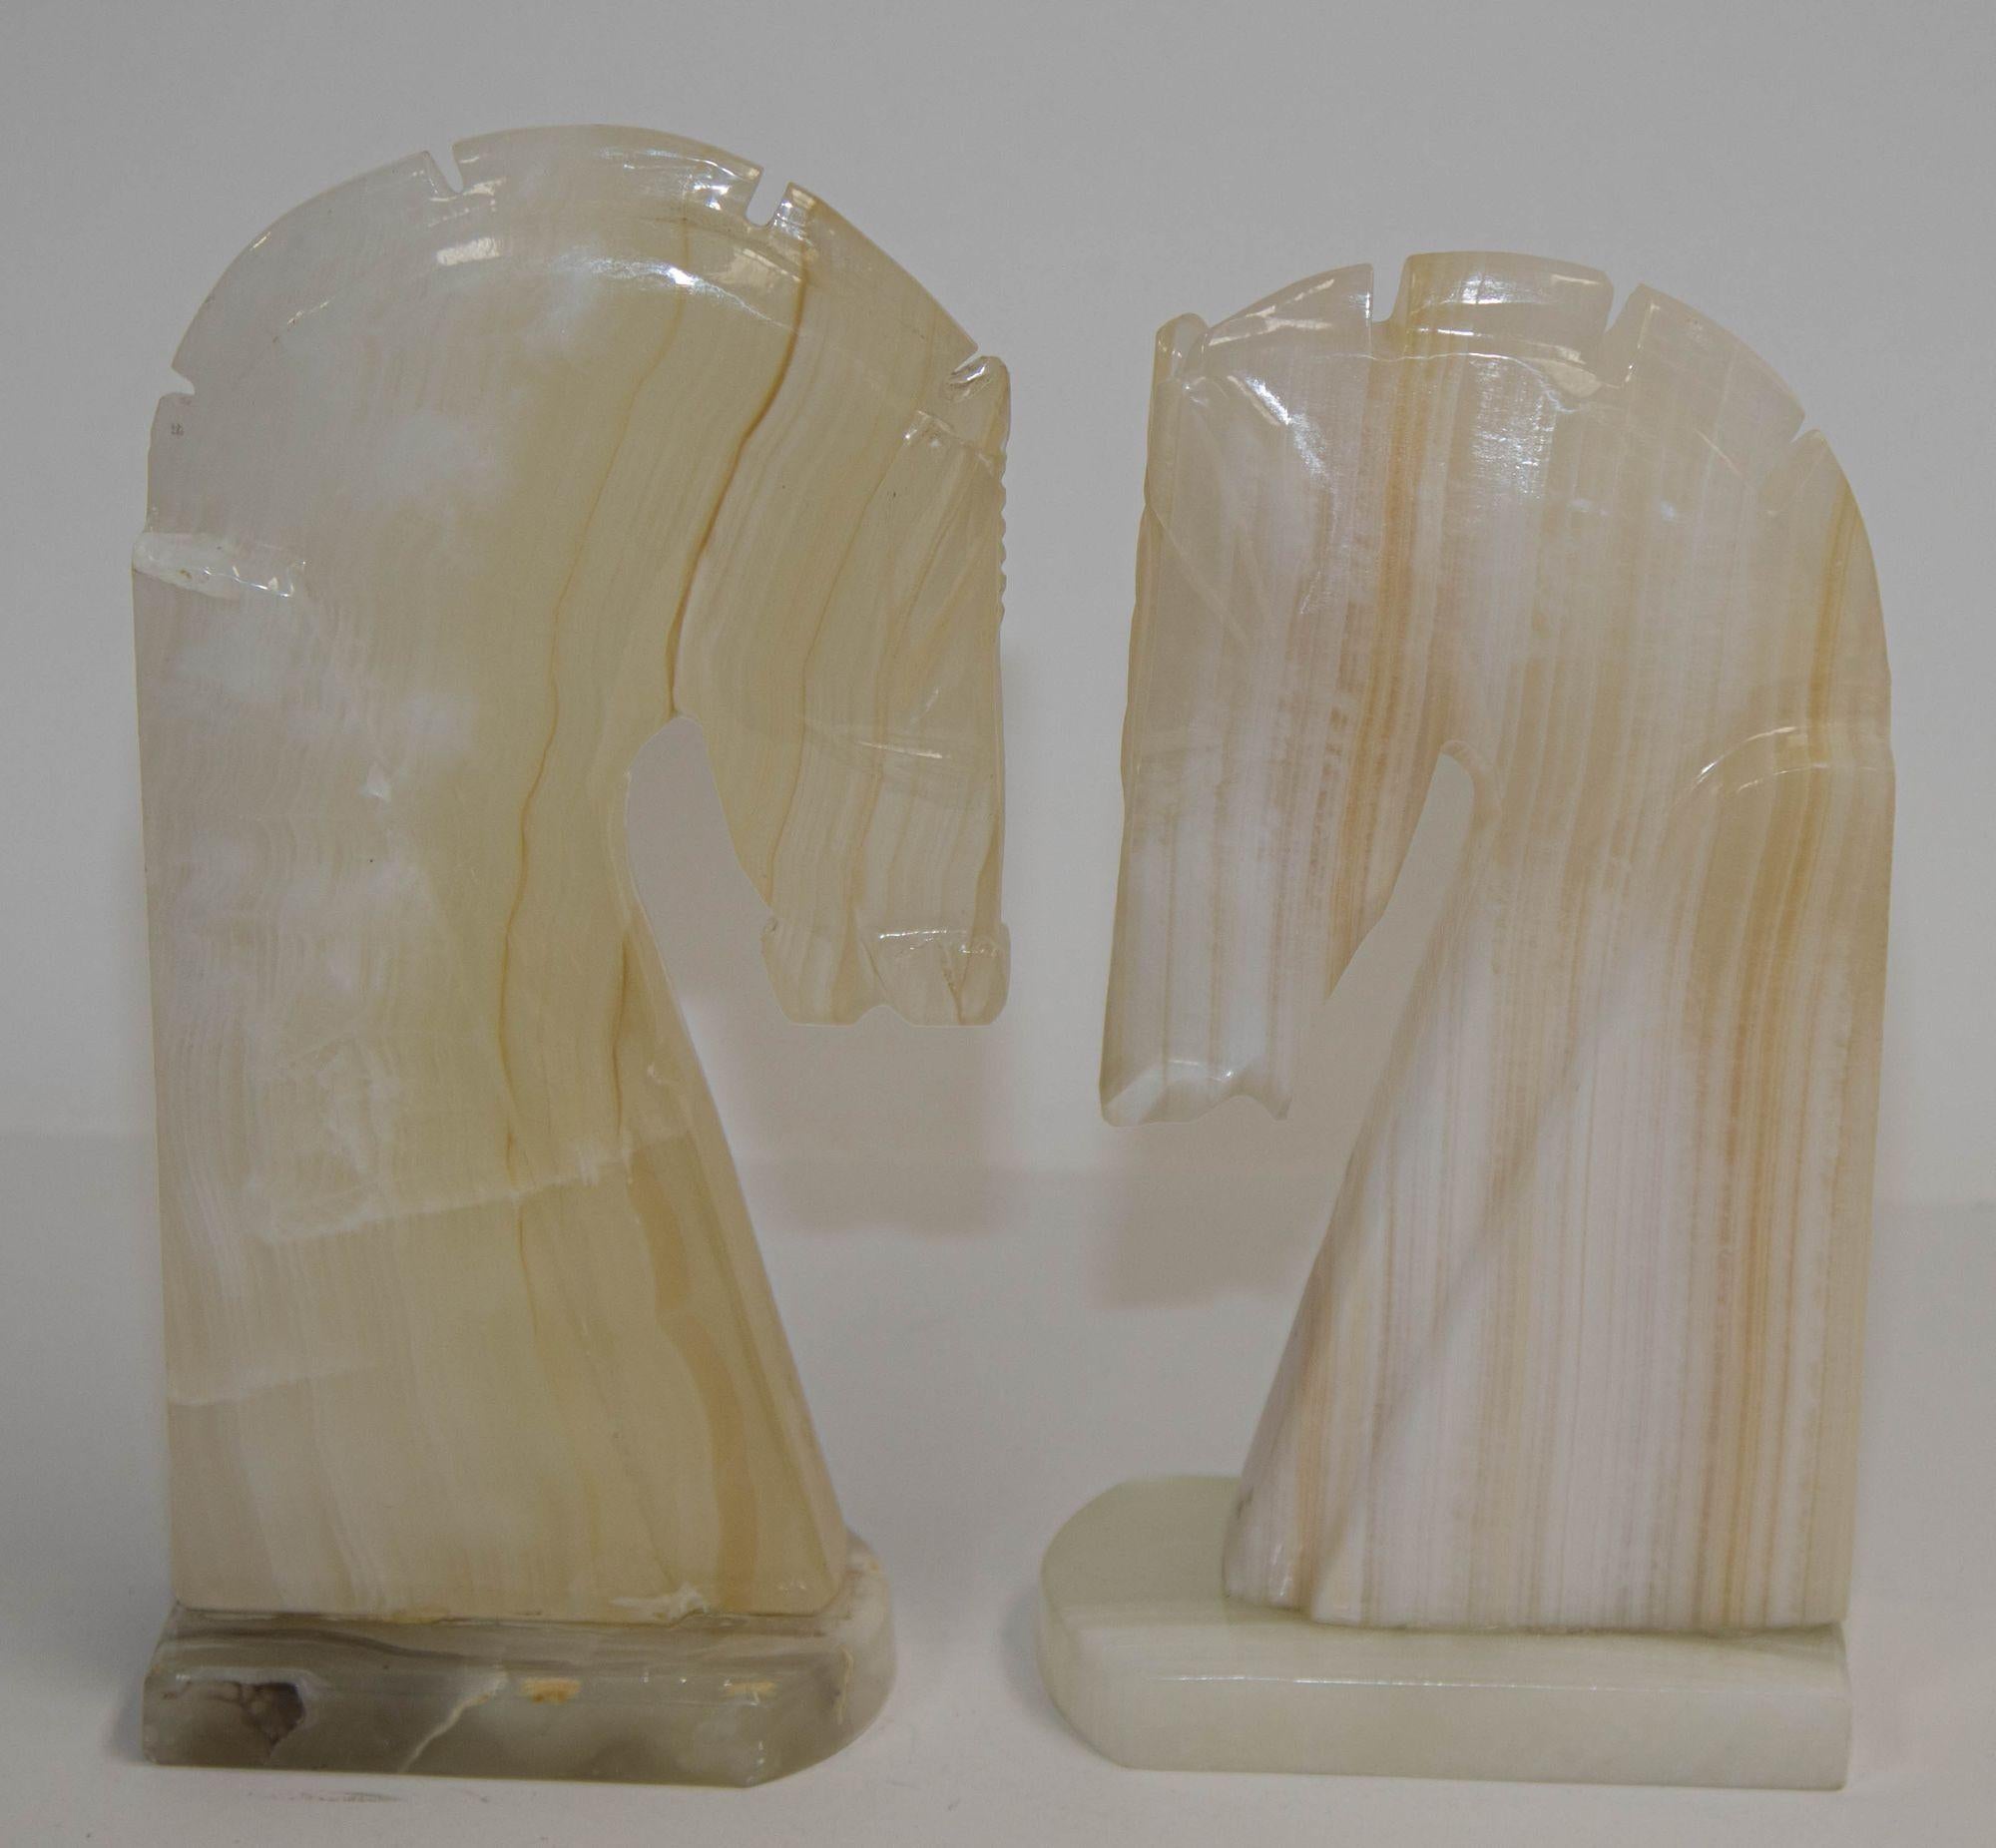 Italian Pair of Art Deco Style Onyx Horses Heads Bookends